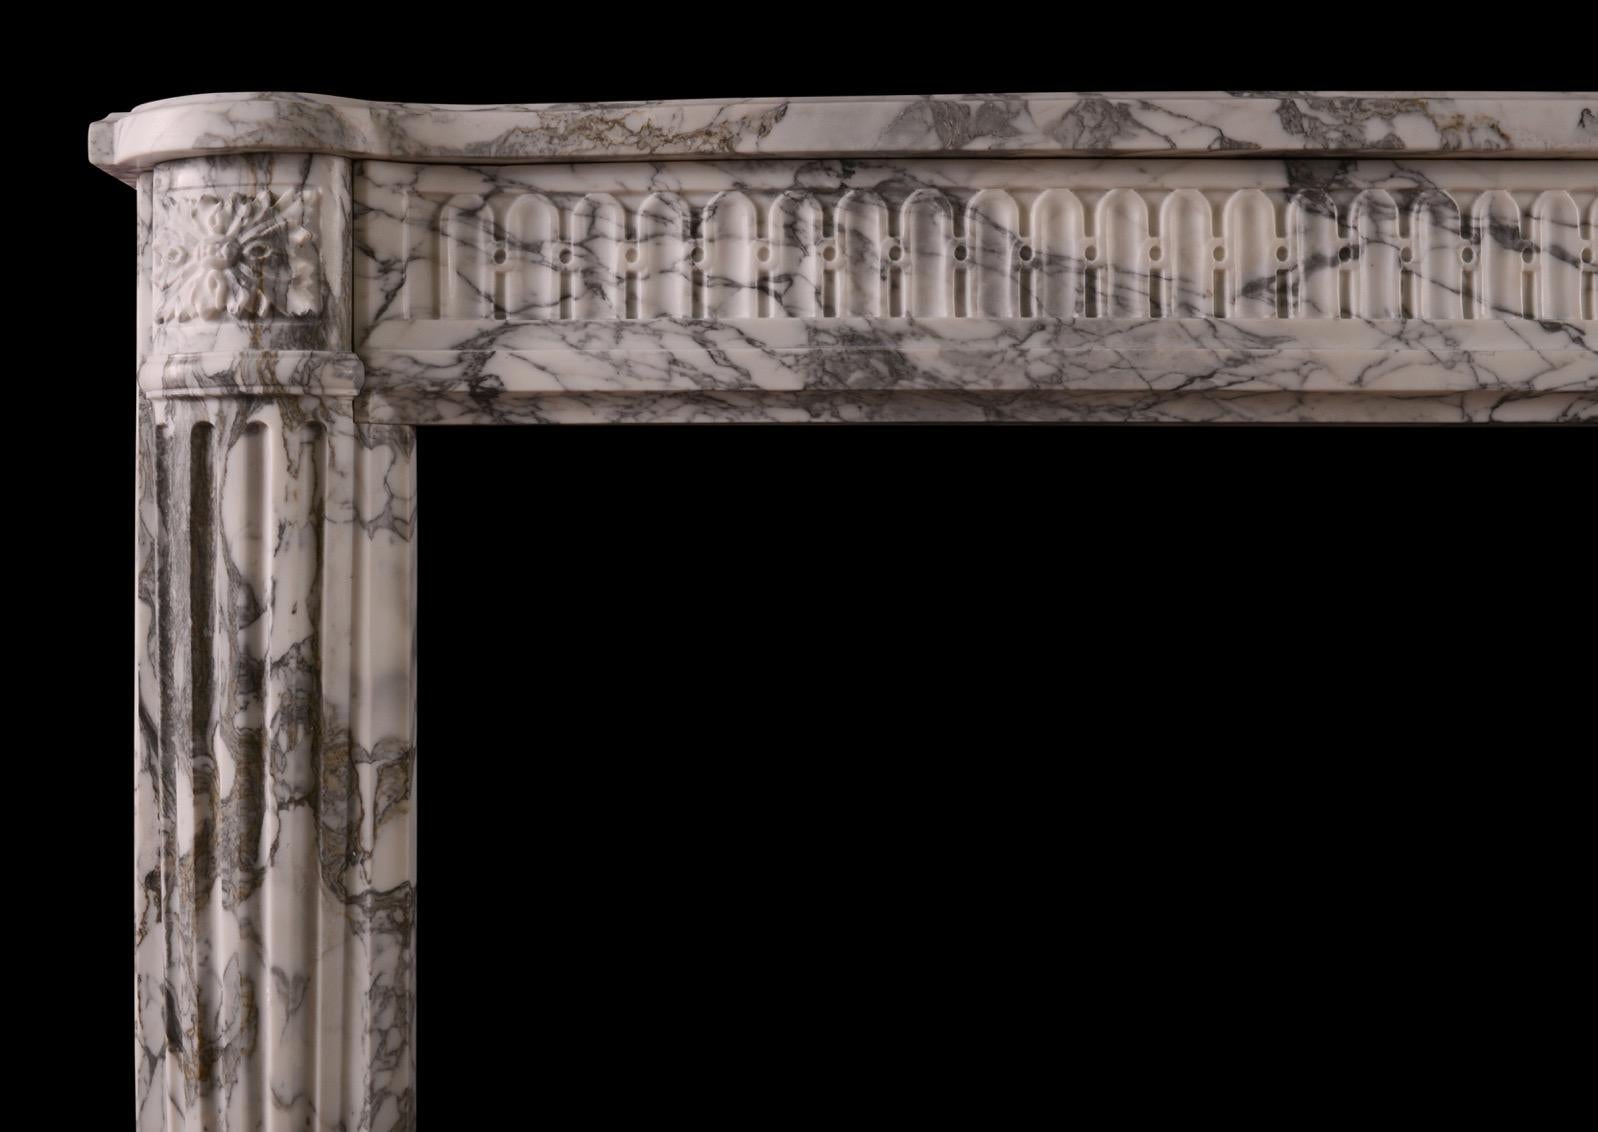 A very elegant French Louis XVI style fireplace in Arabescato marble. The serpentine frieze with fluting of arcaded design. The fluted jambs of rounded form with square paterae end blockings above. Slight olive tone to the darker veining of the